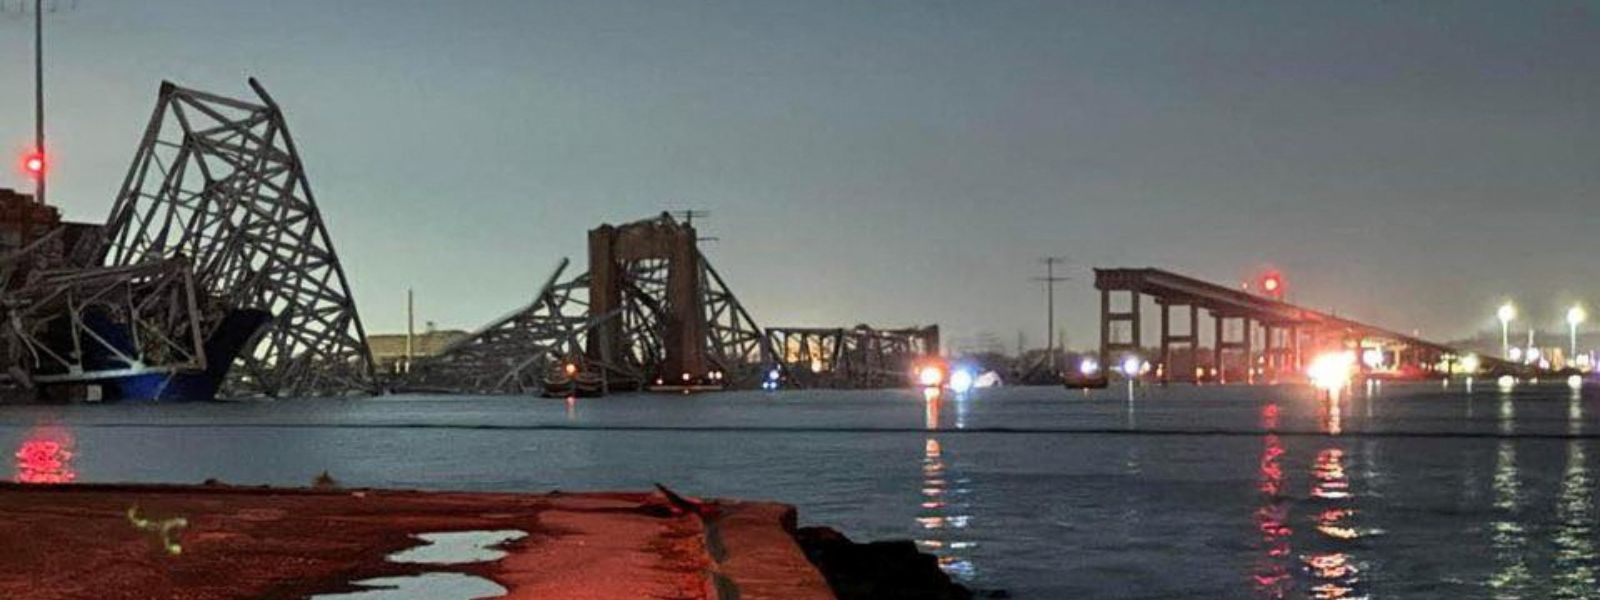 Colombo-bound Ship Collides With Baltimore bridge